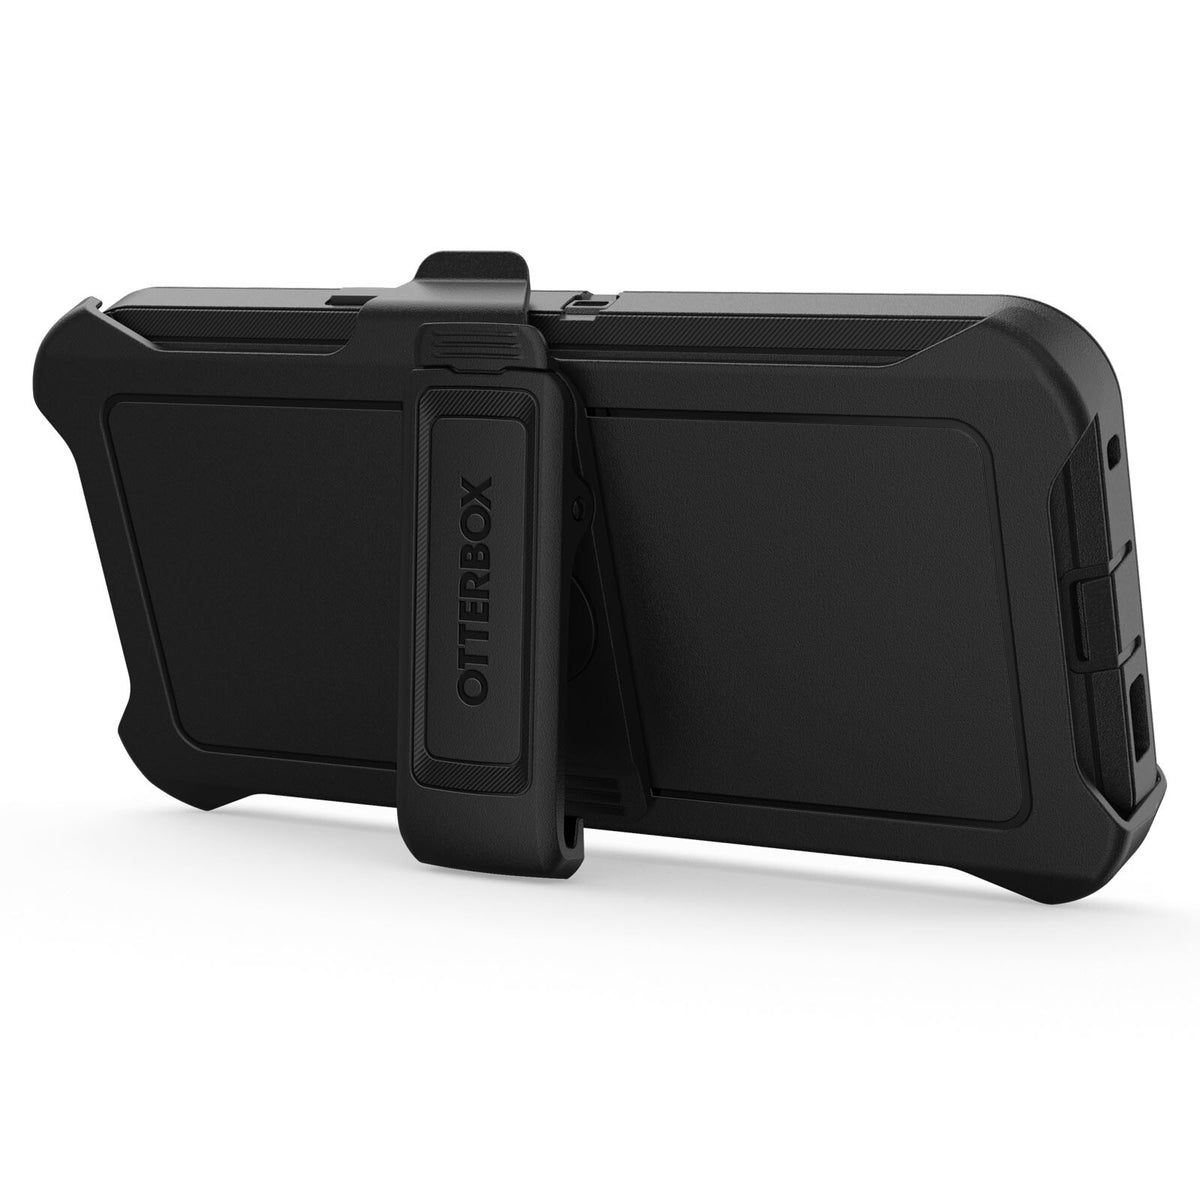 OtterBox Defender Case for Samsung Galaxy XCover6 Pro in Black